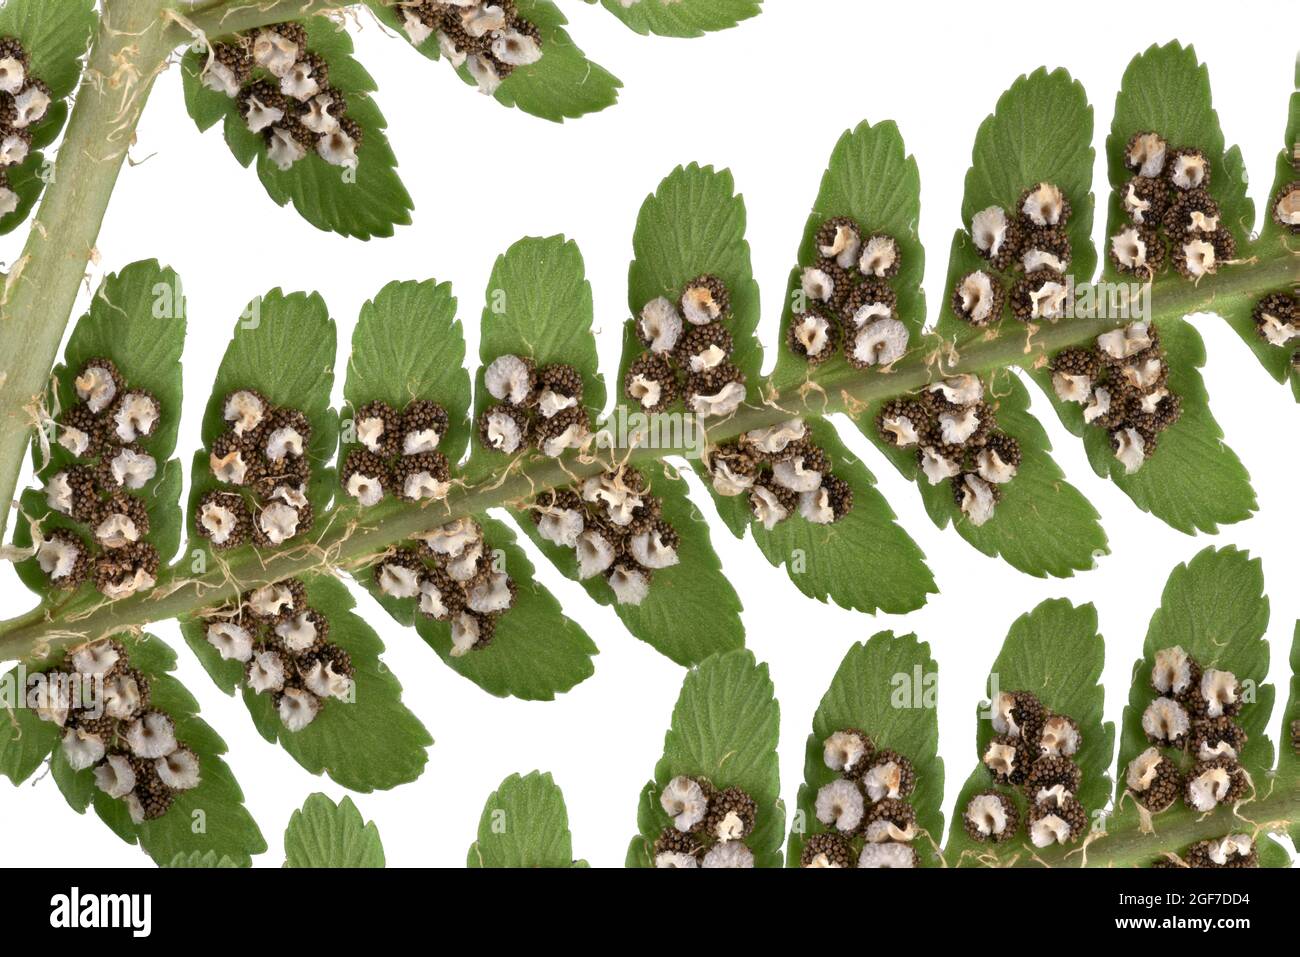 Male fern (Dryopteris filix-mas), leaf from below with spore container (Sori), Germany Stock Photo